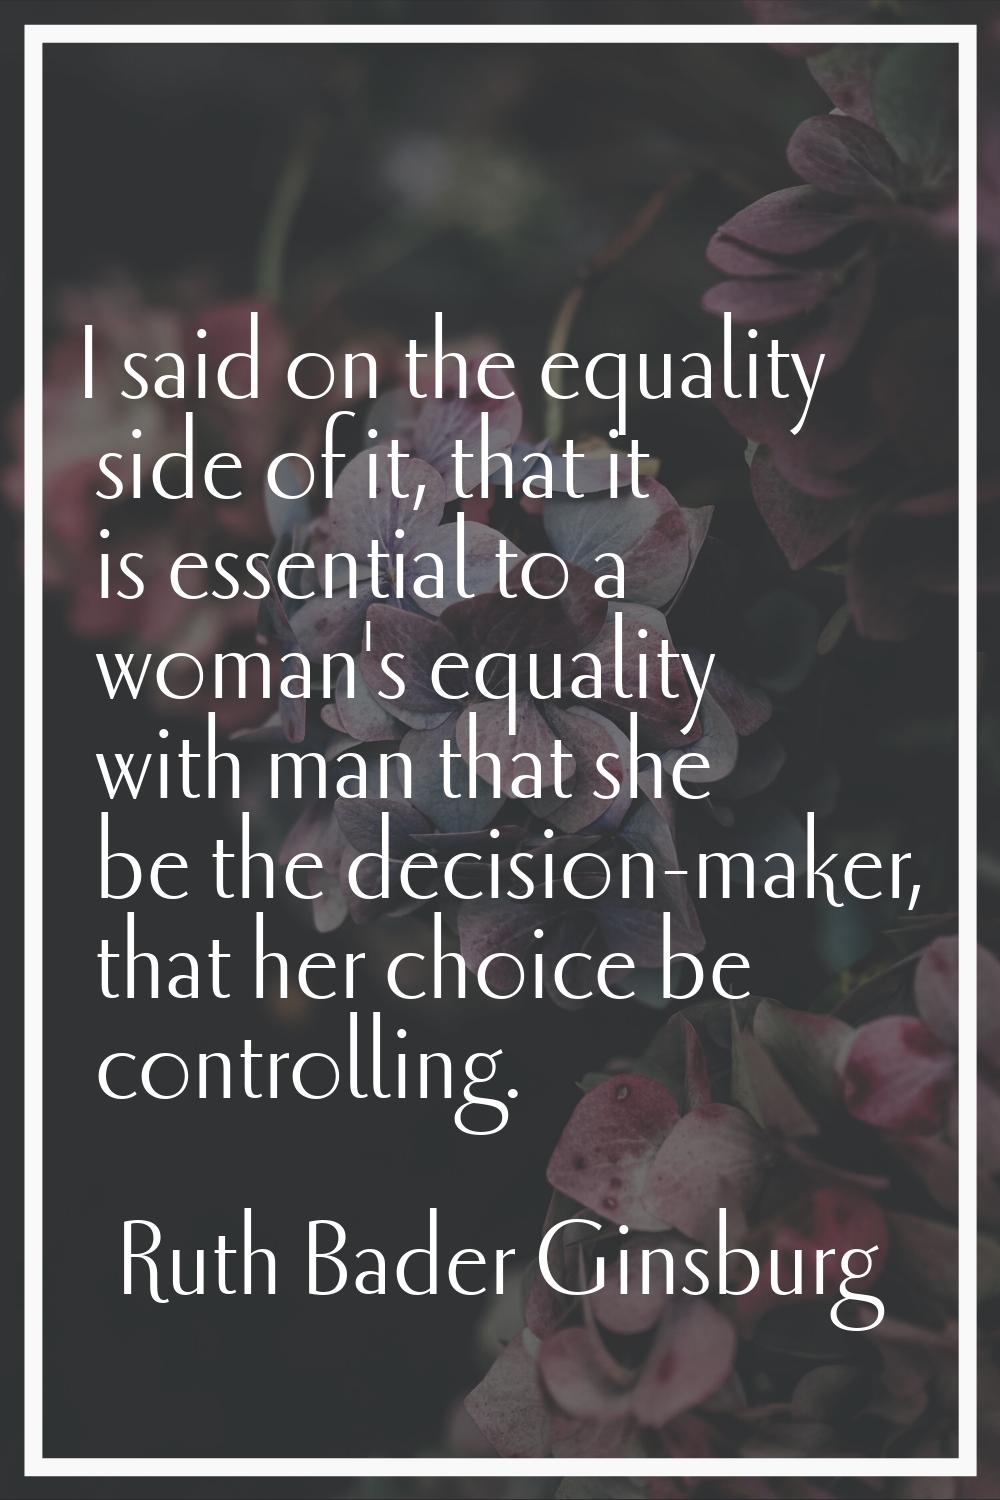 I said on the equality side of it, that it is essential to a woman's equality with man that she be 